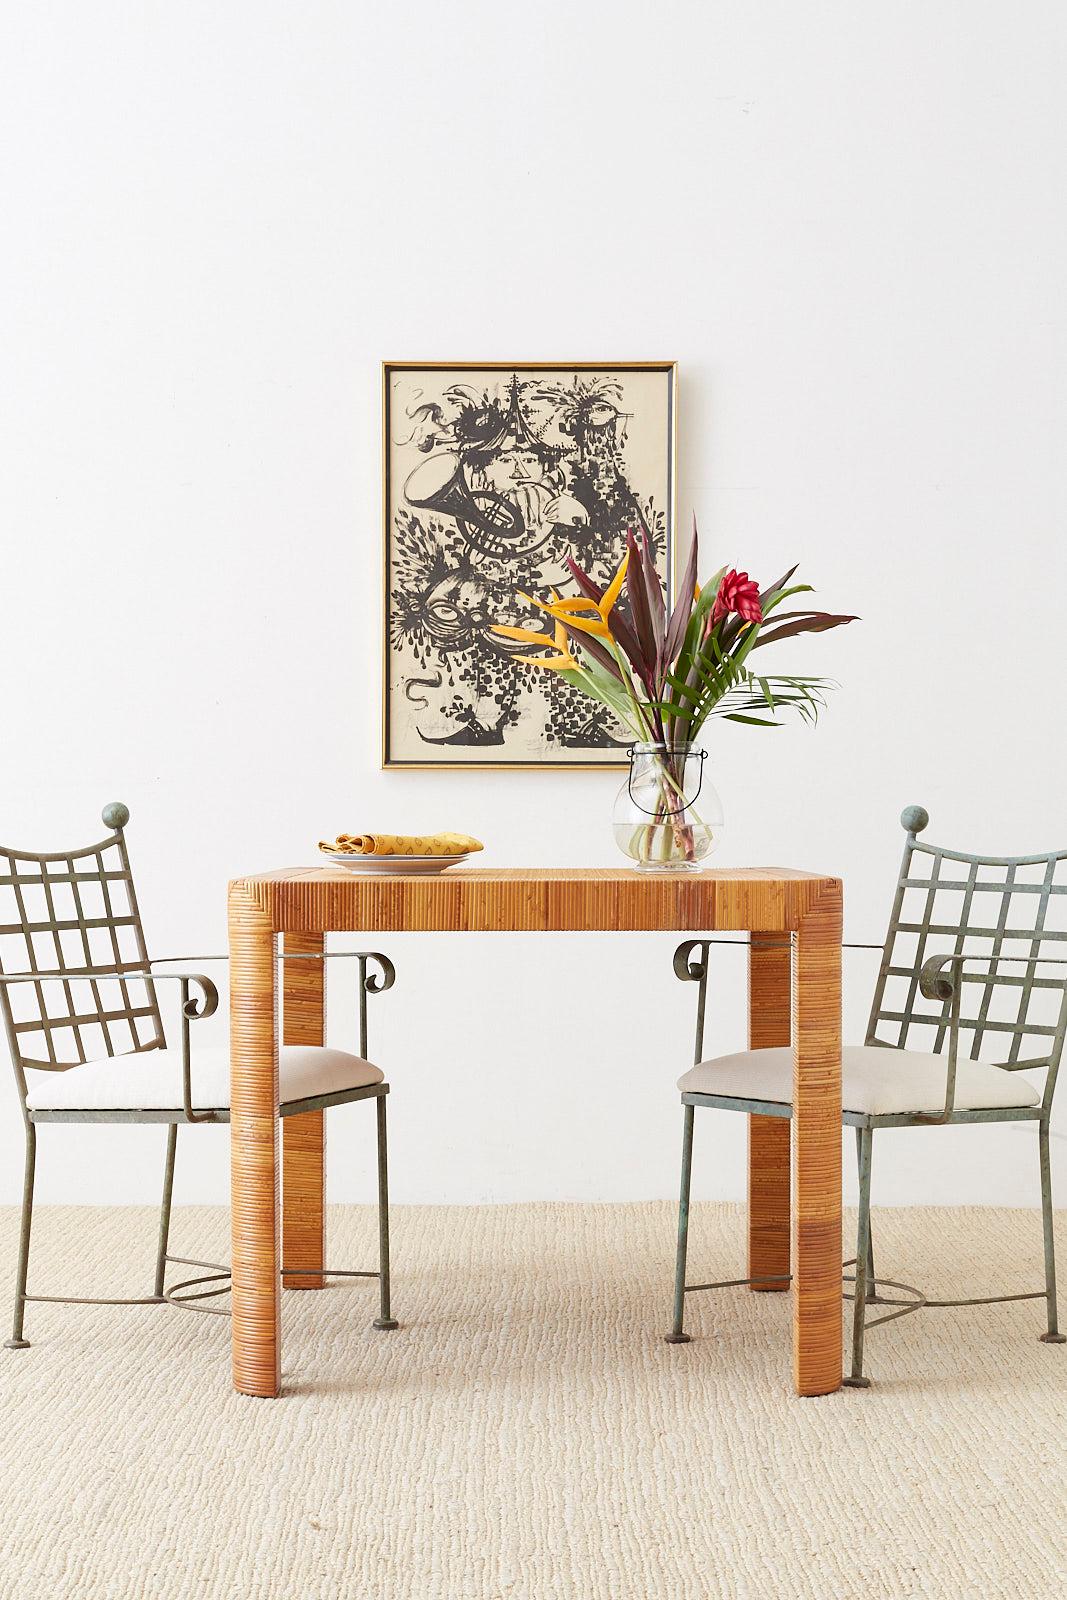 Chic bamboo and rattan breakfast or dining table featuring a basket weave frame and rounded legs. Produced by Bielecky Brothers in New York, makers of the best custom rattan furniture since nearly 1900. The tabletop is inset with a woven wicker for